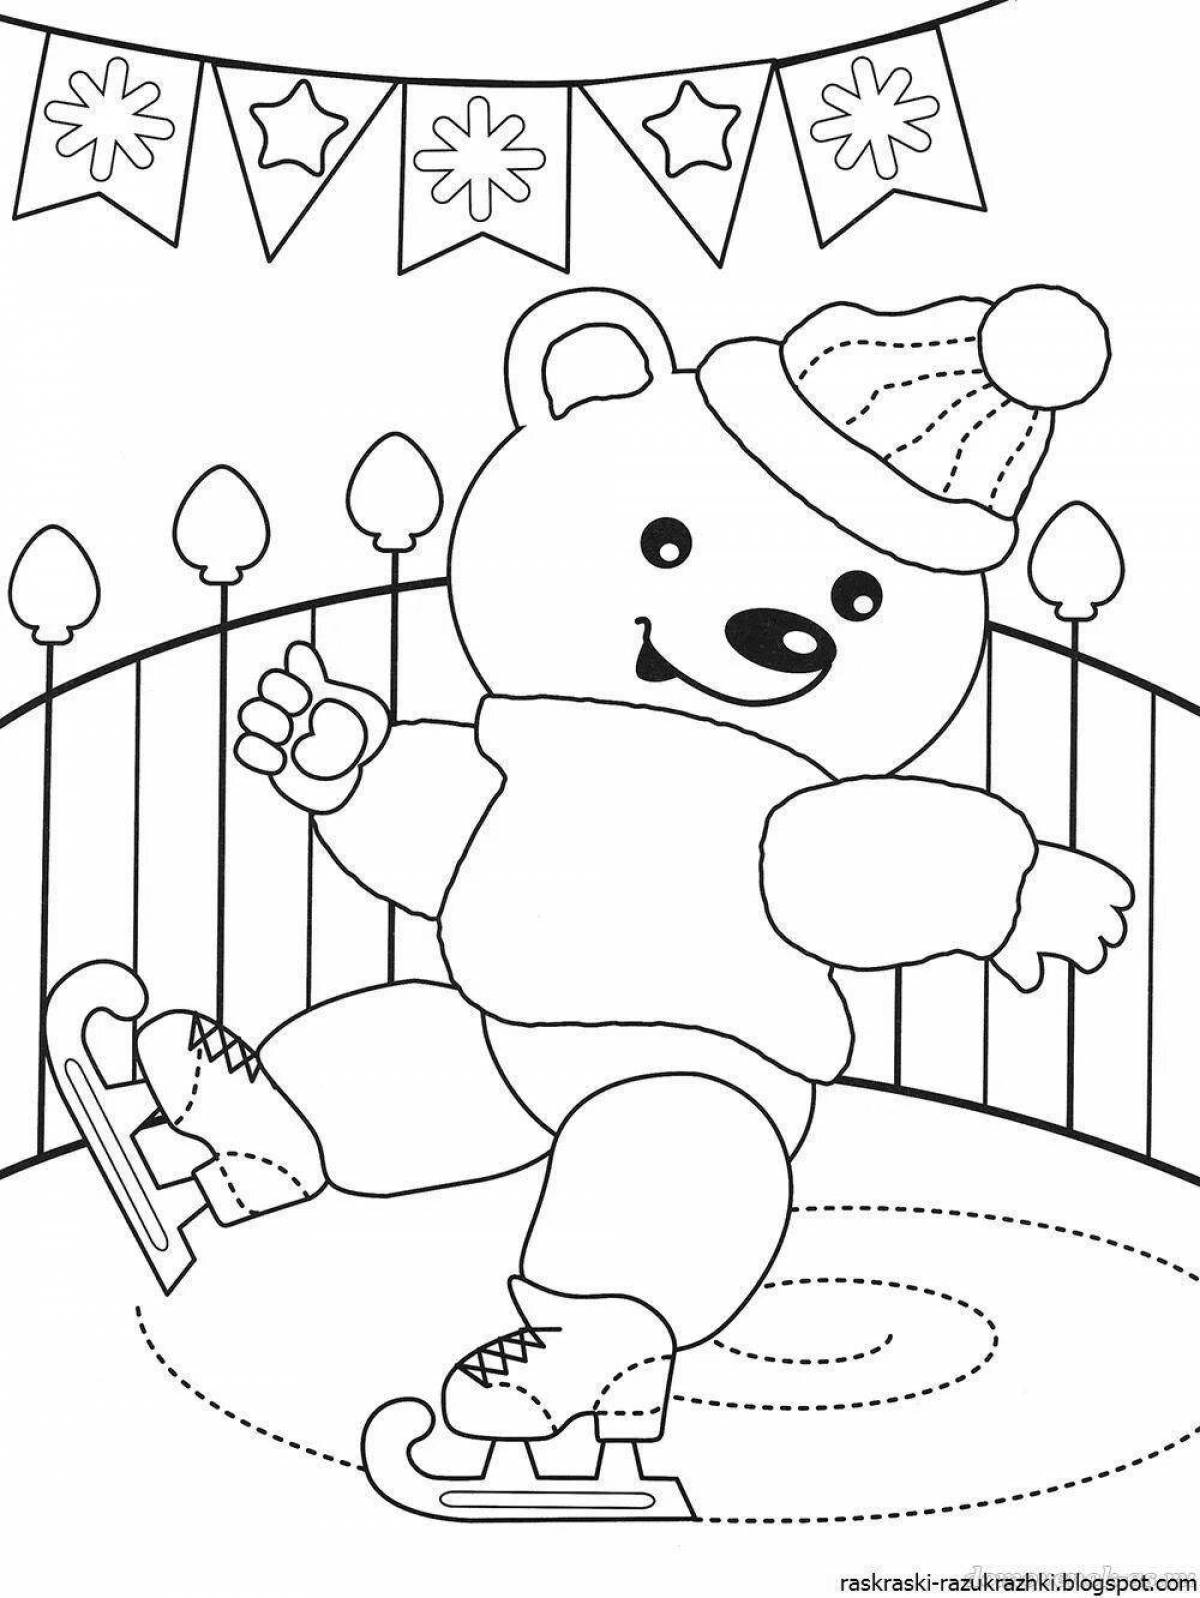 Shimmering winter coloring book for 5 year olds